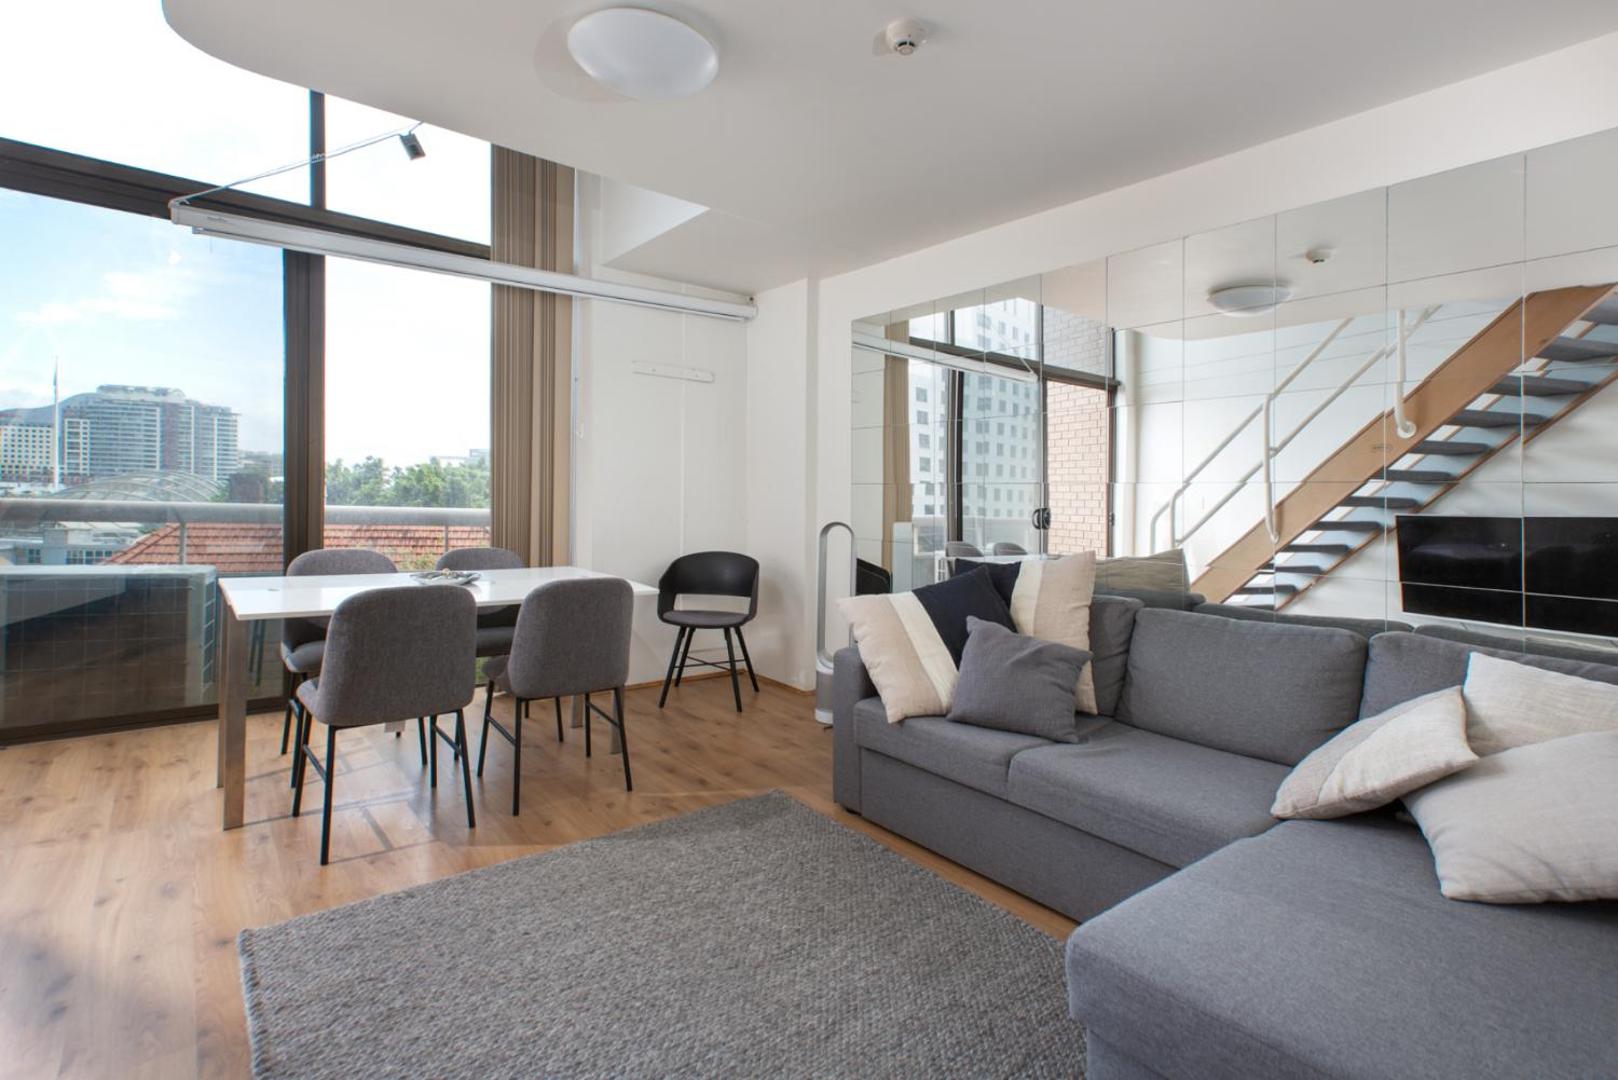 S203S – The Loft by Darling Harbour